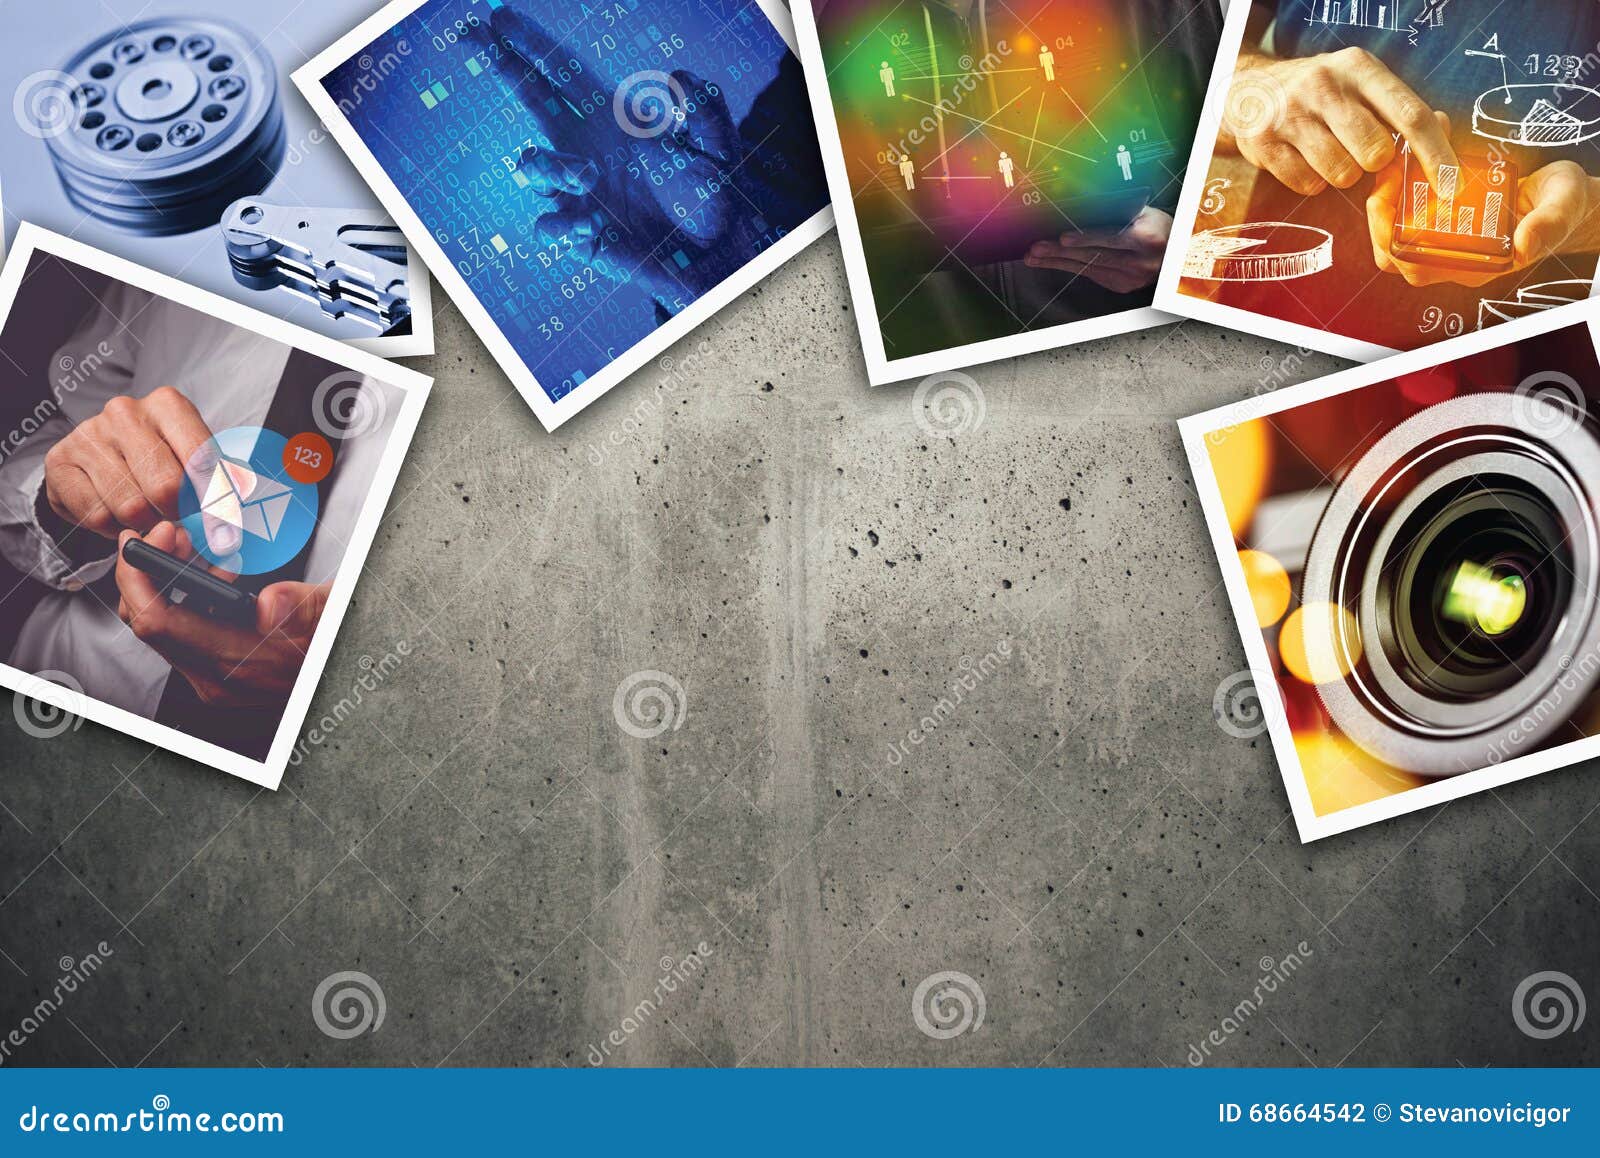 Tech Collage Stock Image 5687065